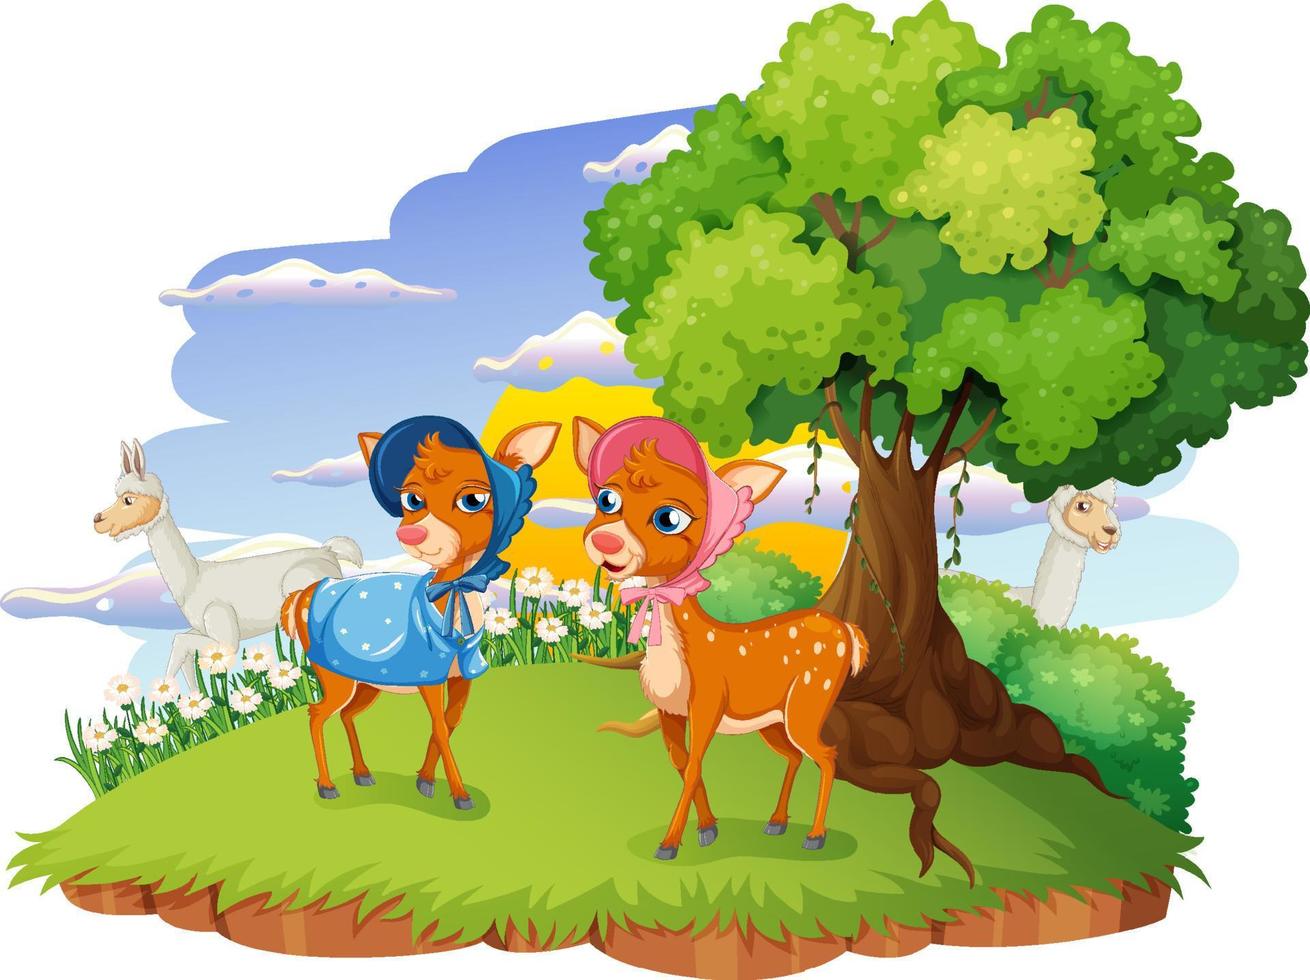 Isolated forest scene with deers in cartoon style vector